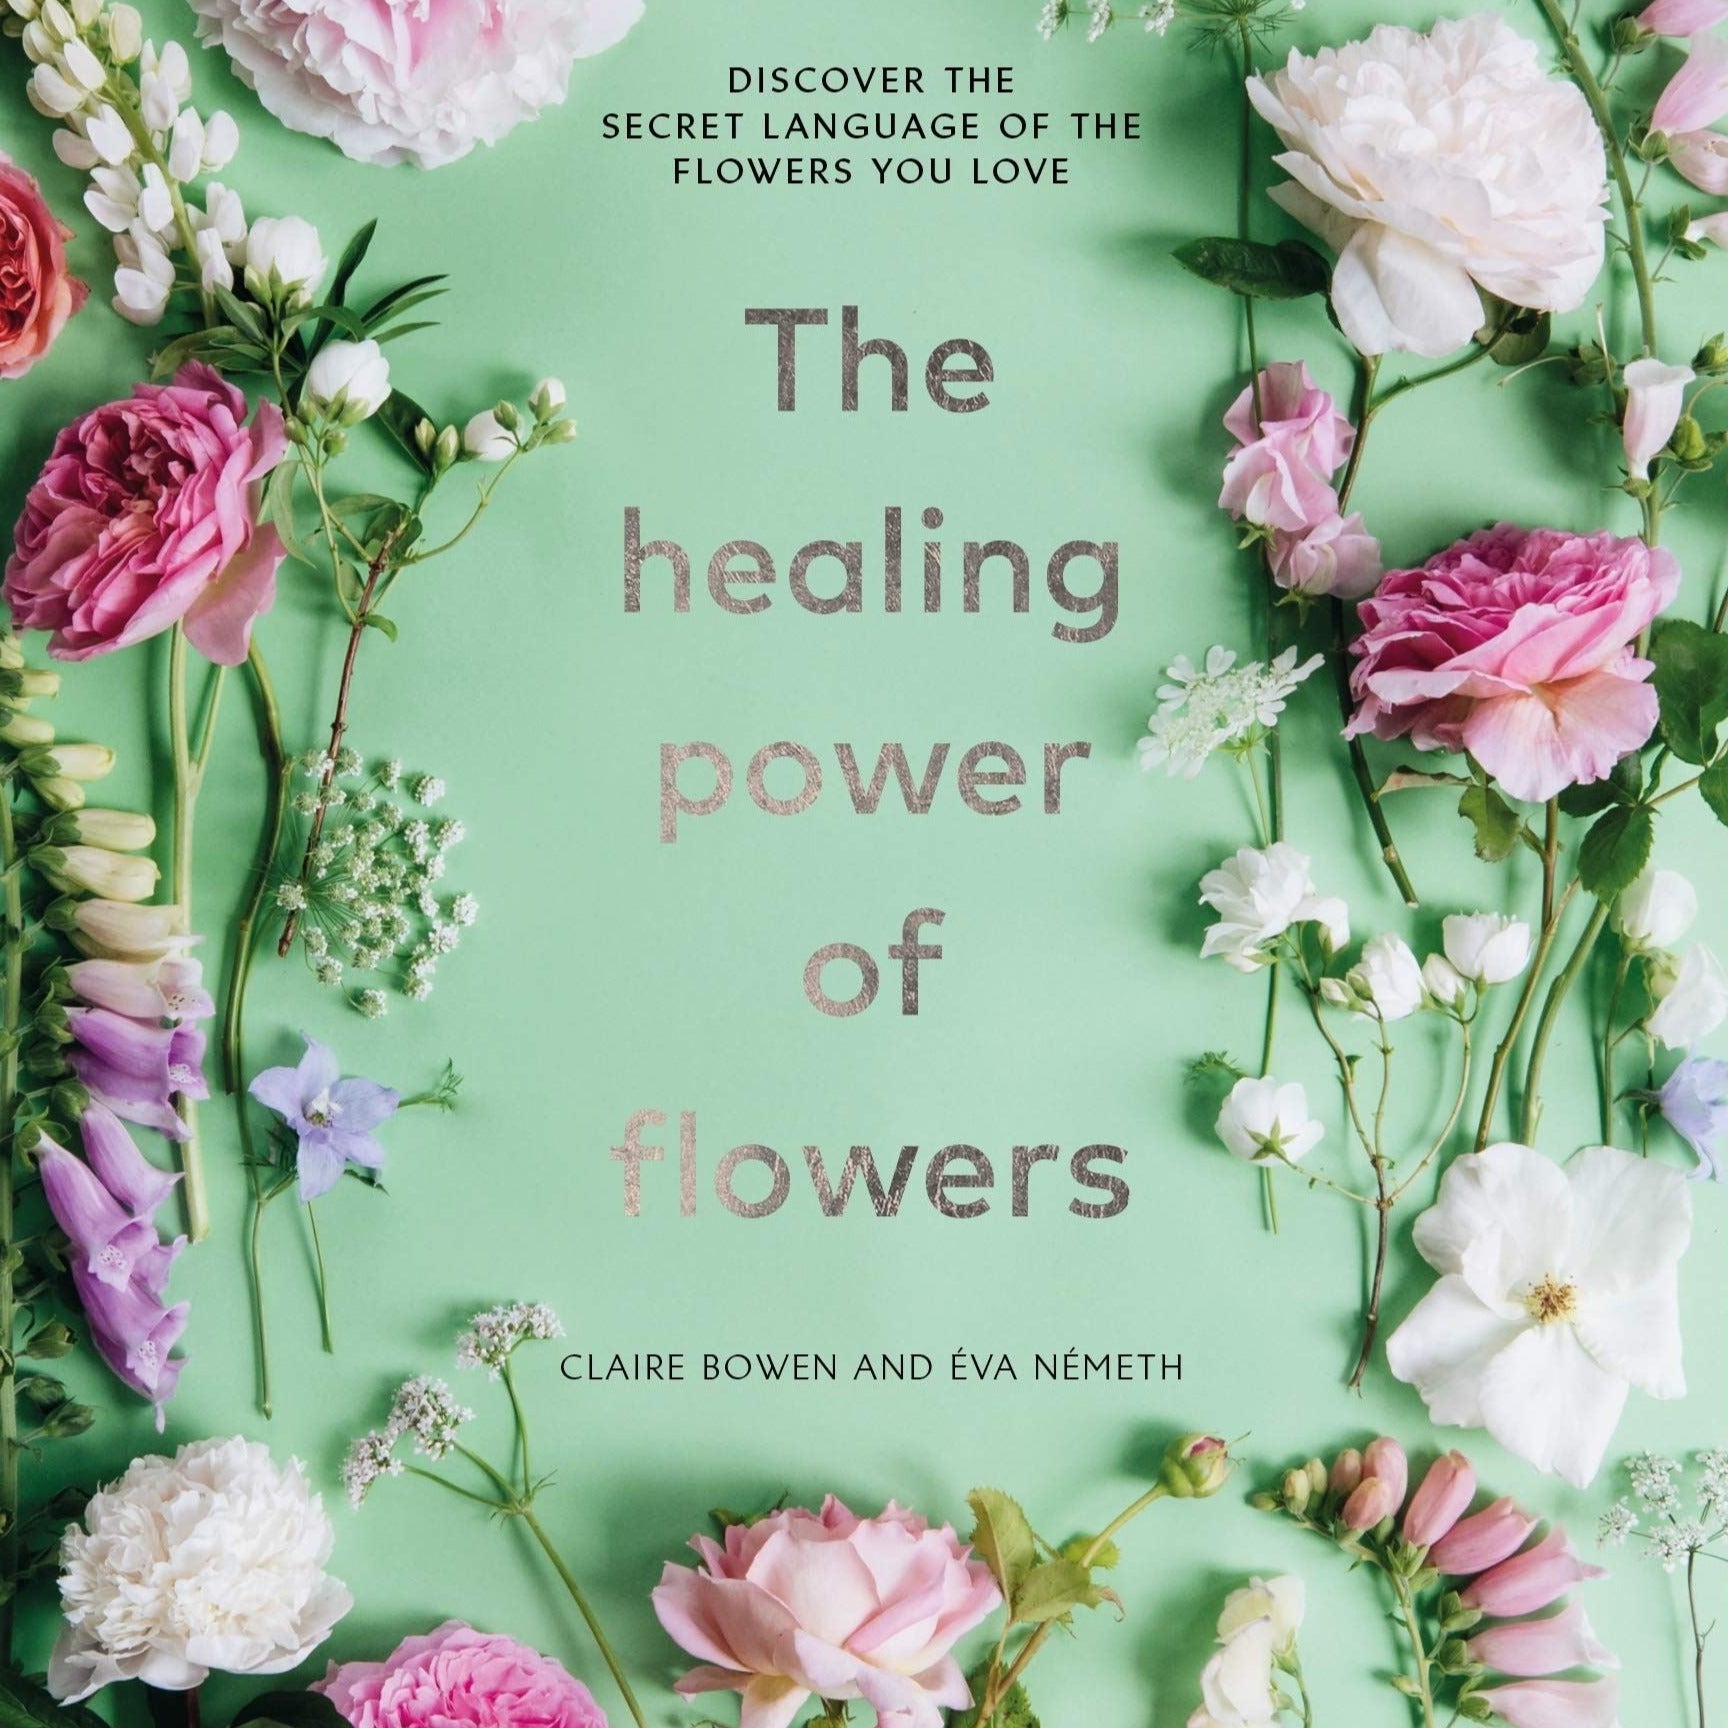 The Healing Power of Flowers